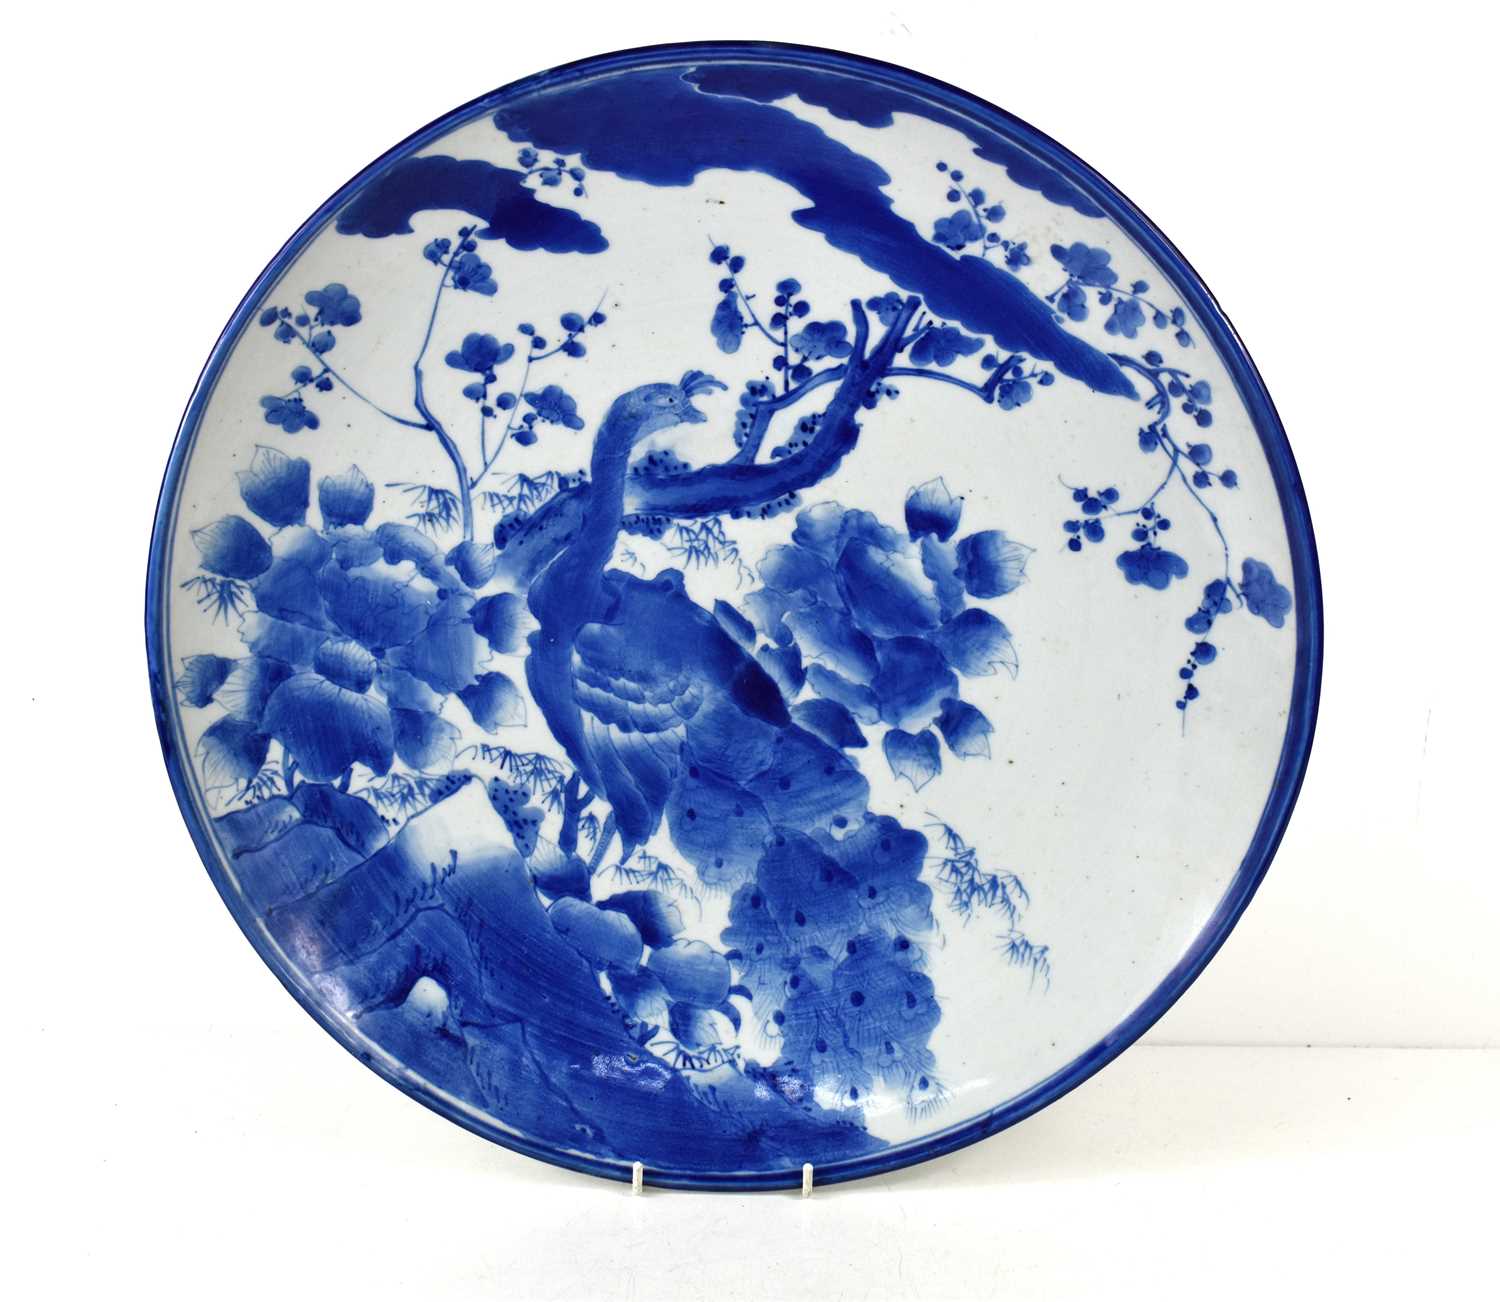 An early 19th century Chinese blue and white porcelain charger, decorated with a peacock amongst